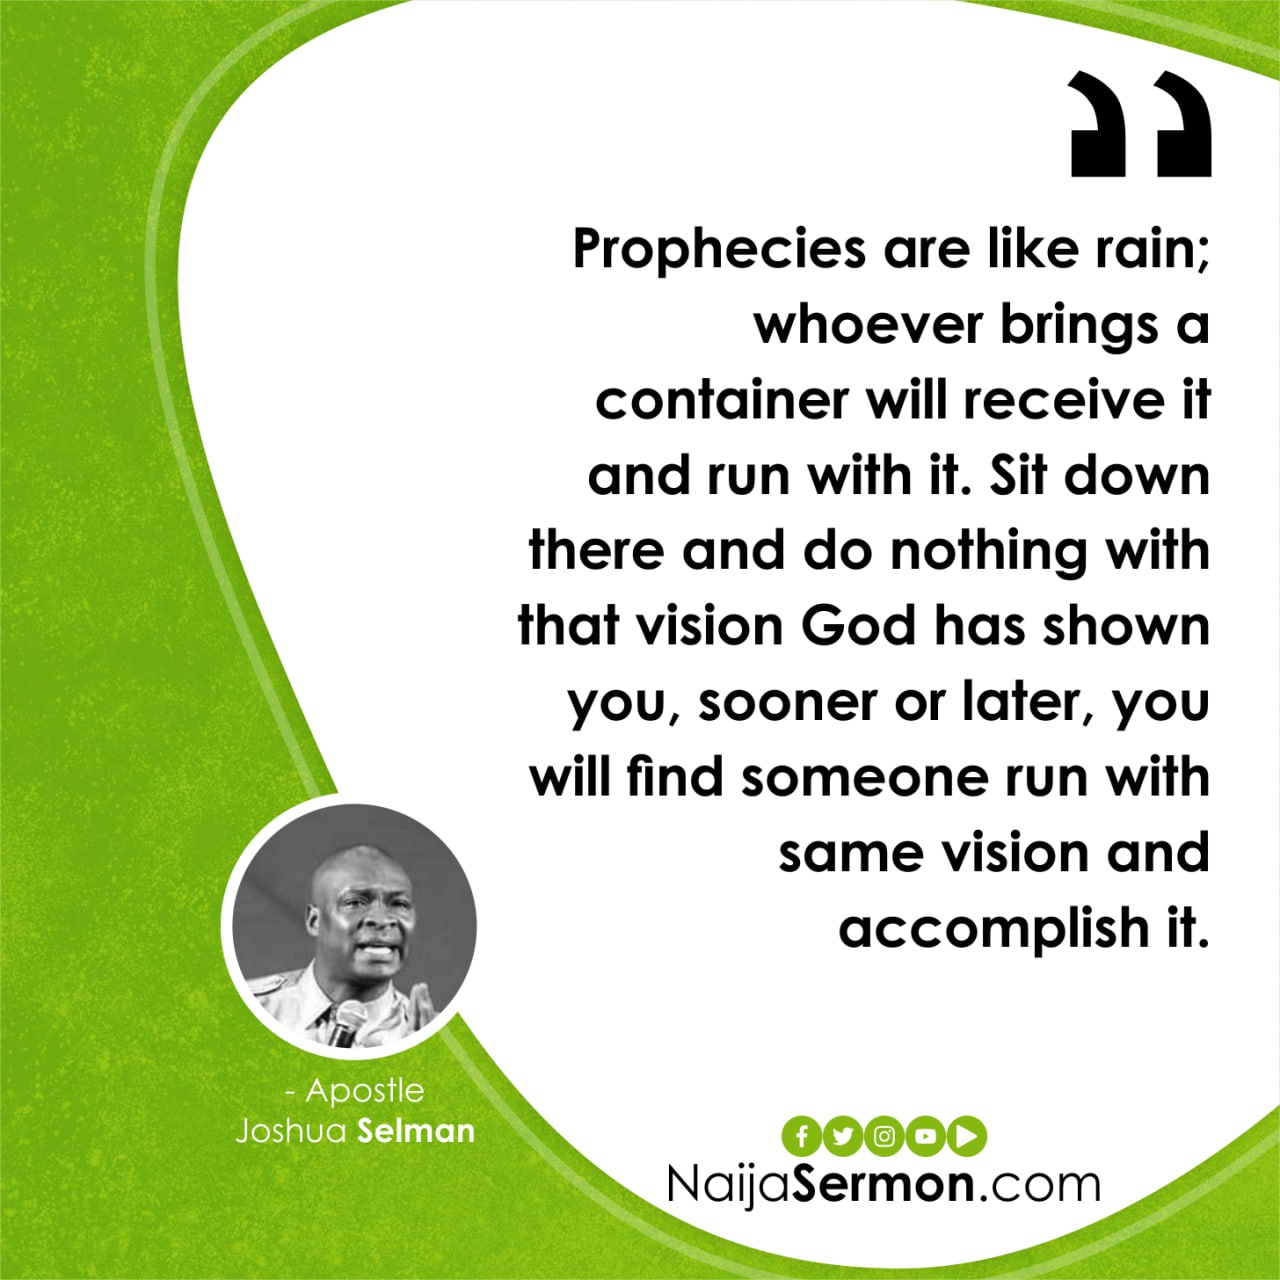 QUOTE OF THE DAY BY APOSTLE JOSHUA SELMAM 18